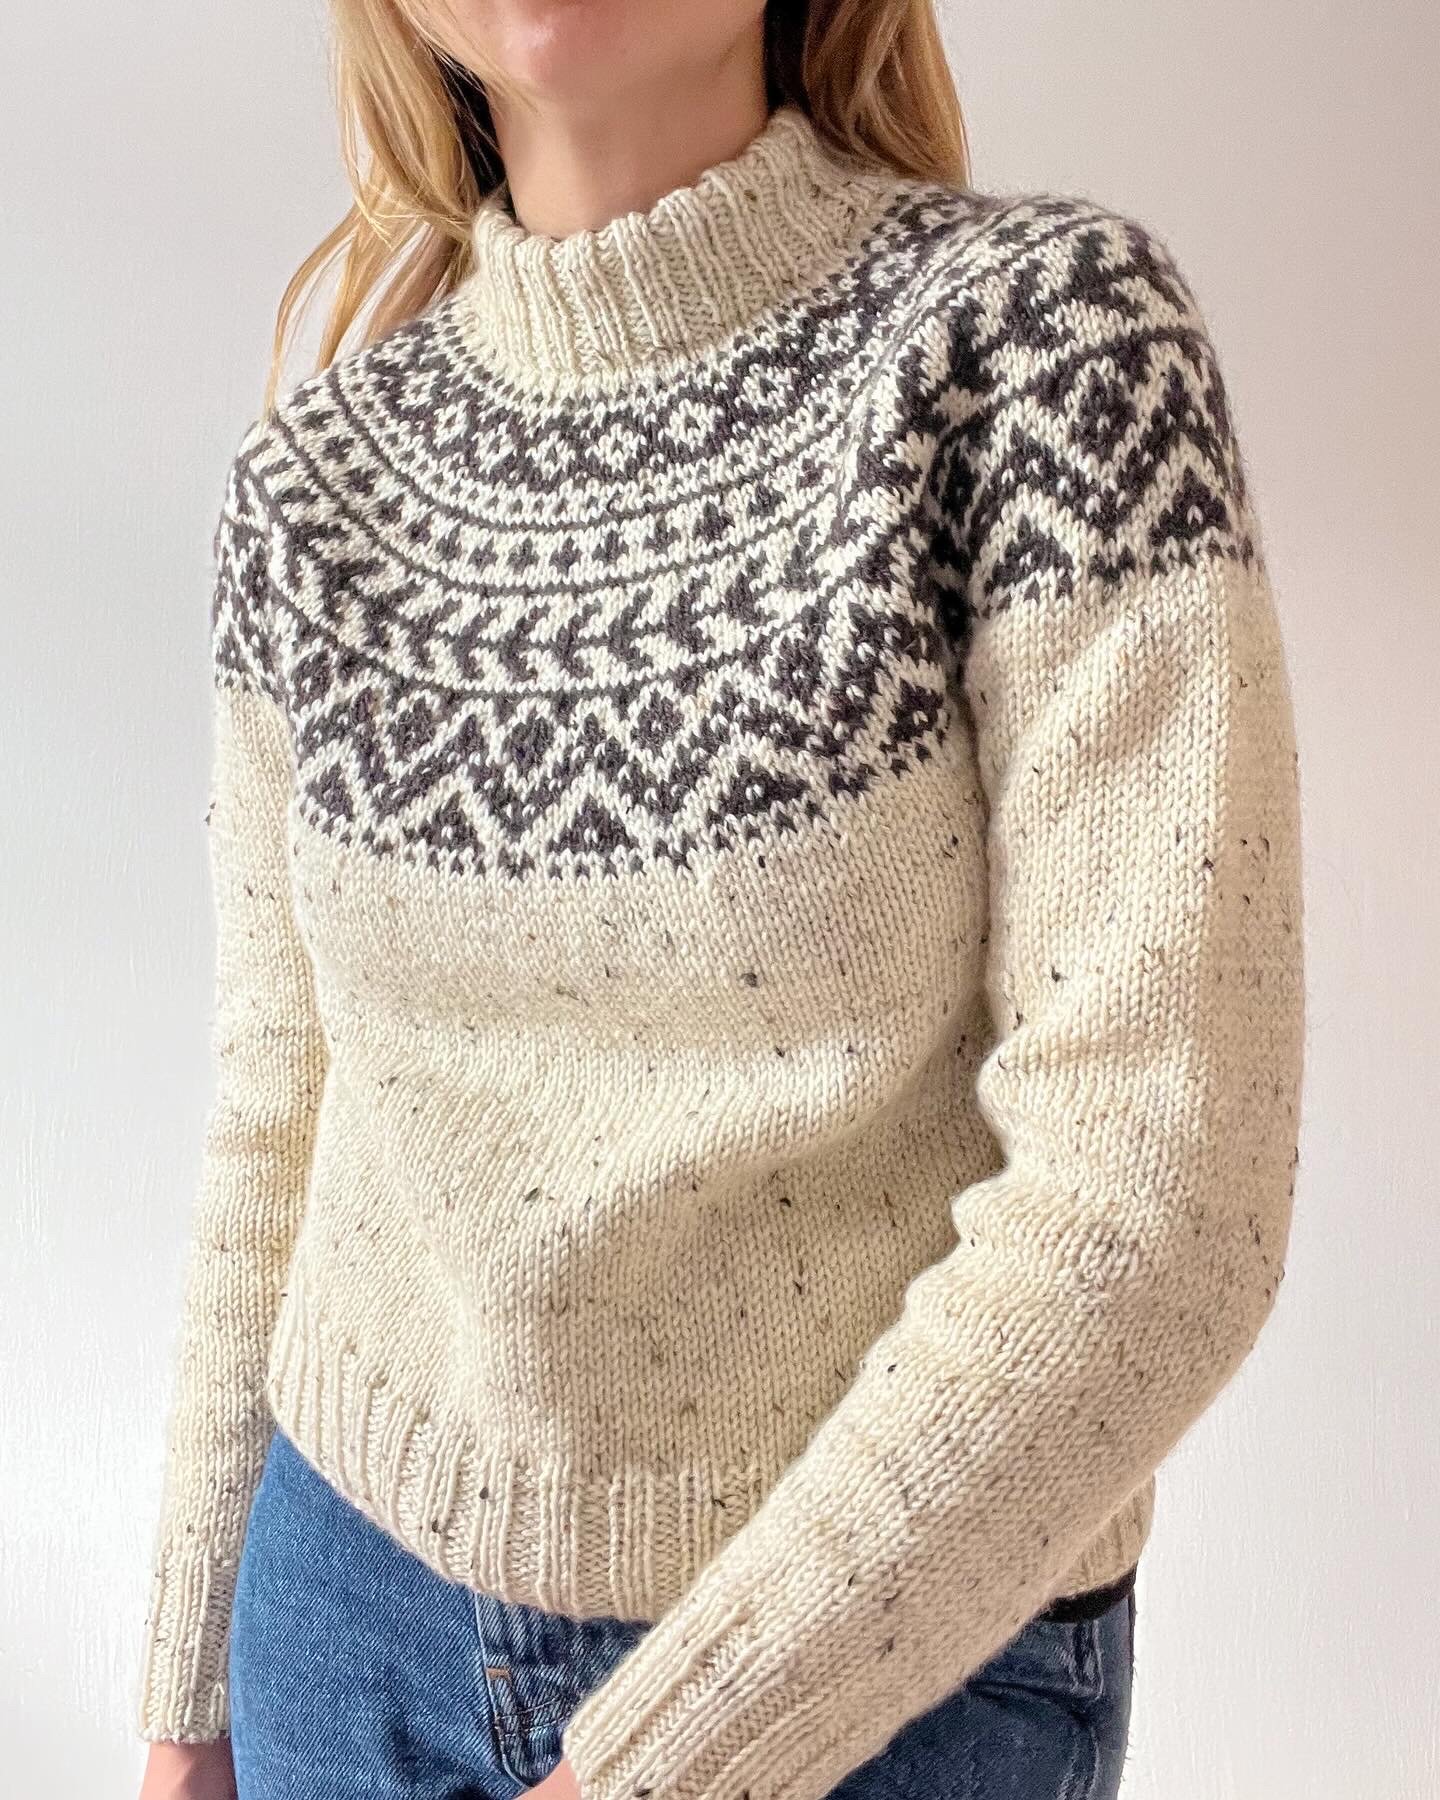 Haze Sweater — The Knit Purl Girl